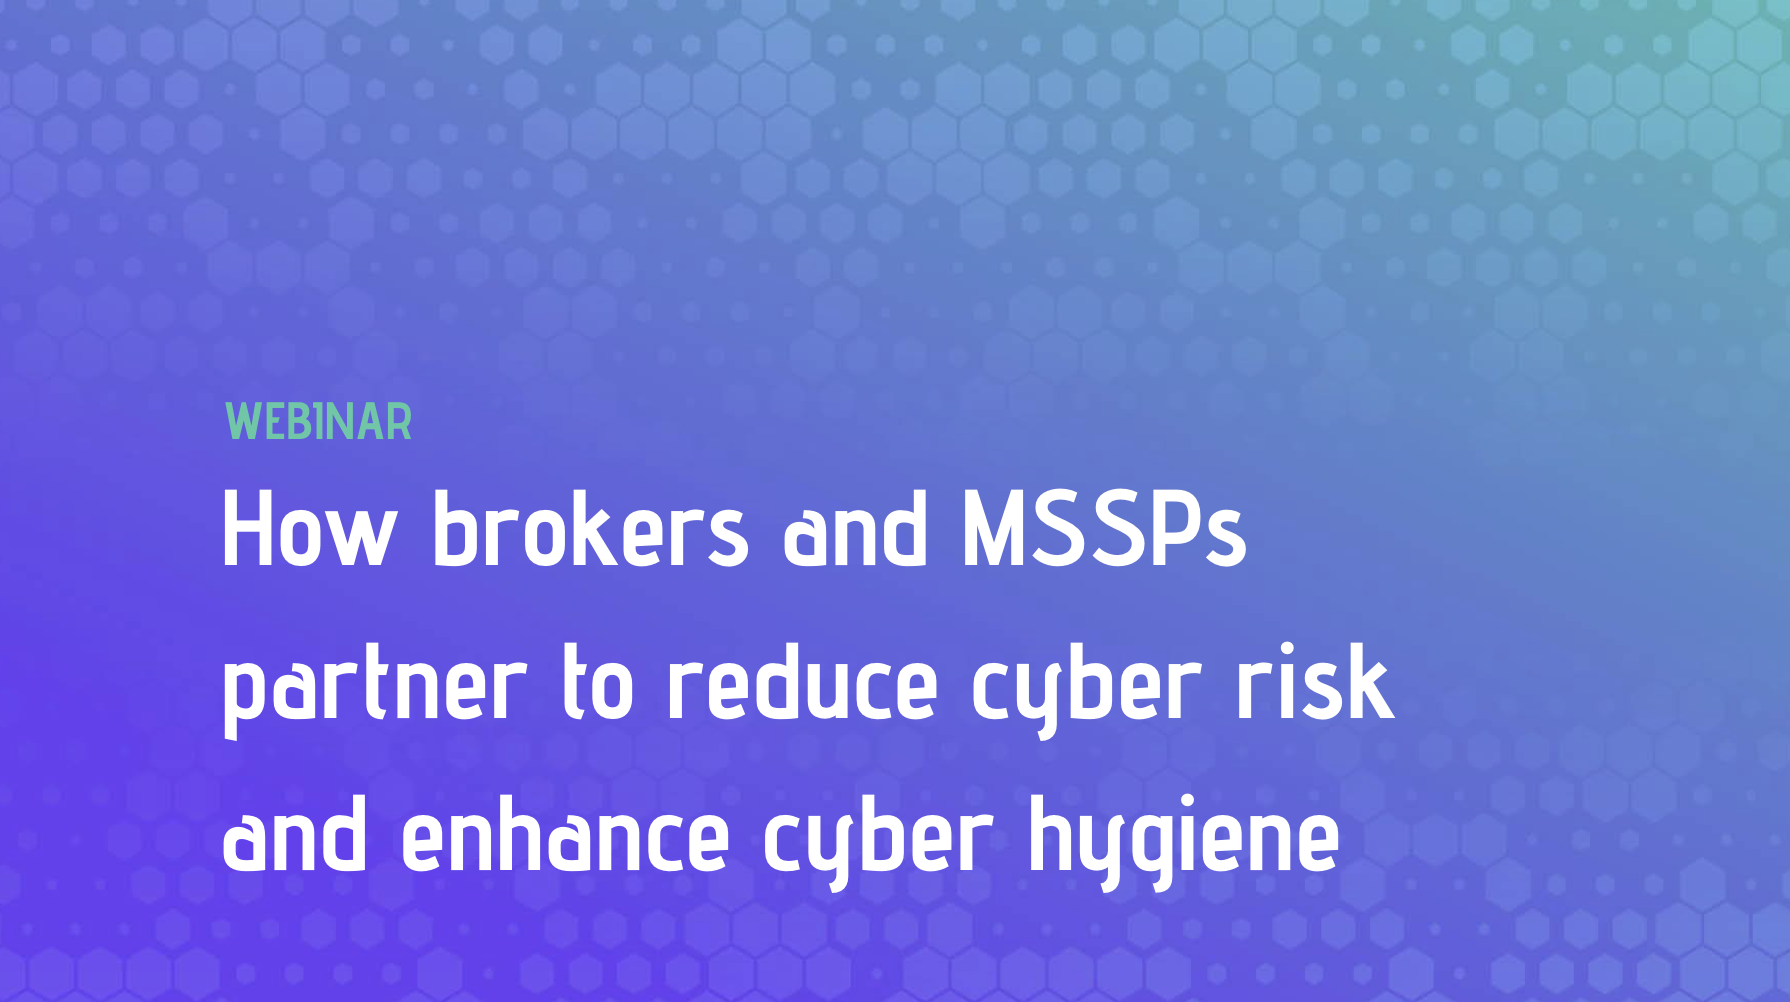 How brokers and MSSPs partner to reduce cyber risk and enhance cyber hygiene